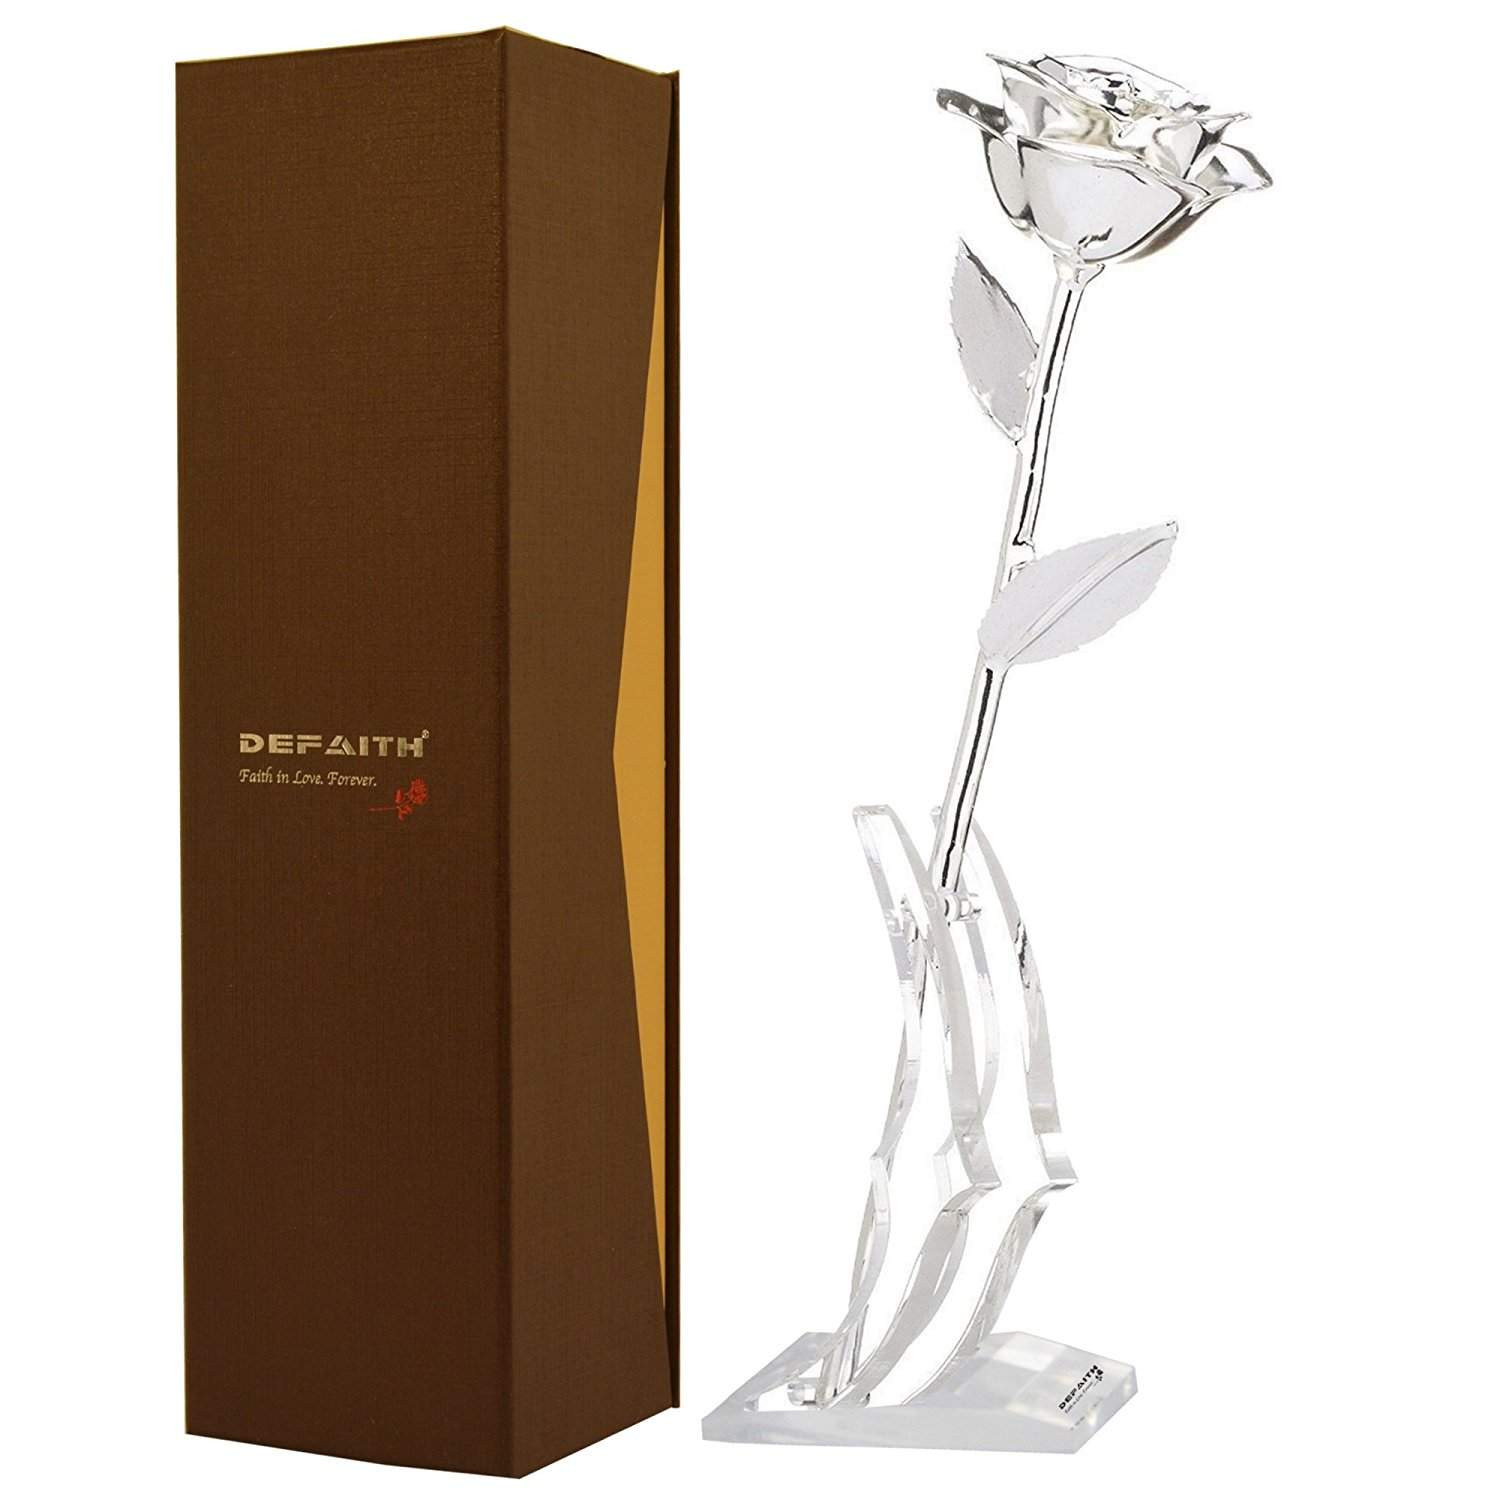 Silver Anniversary Gift Ideas
 Top 20 Best 25th Wedding Anniversary Gifts